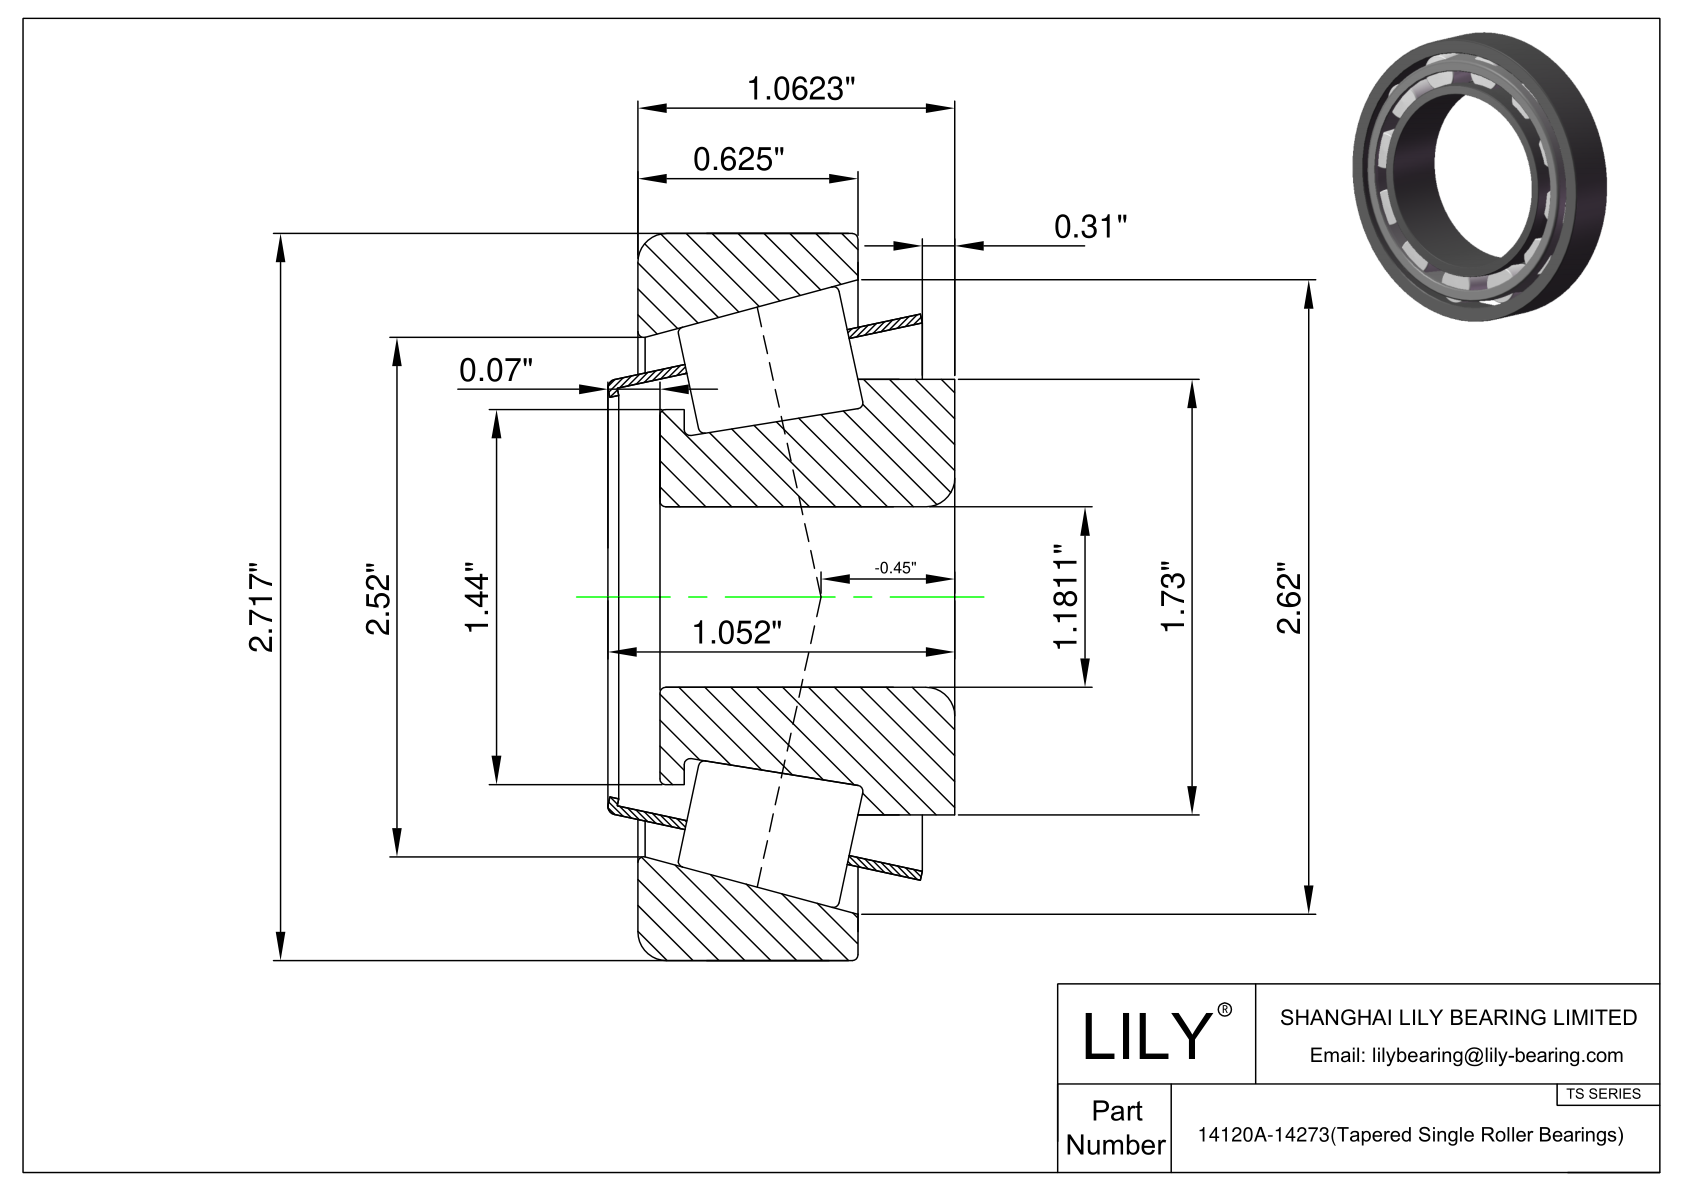 14120-14299 TS (Tapered Single Roller Bearings) (Imperial) cad drawing